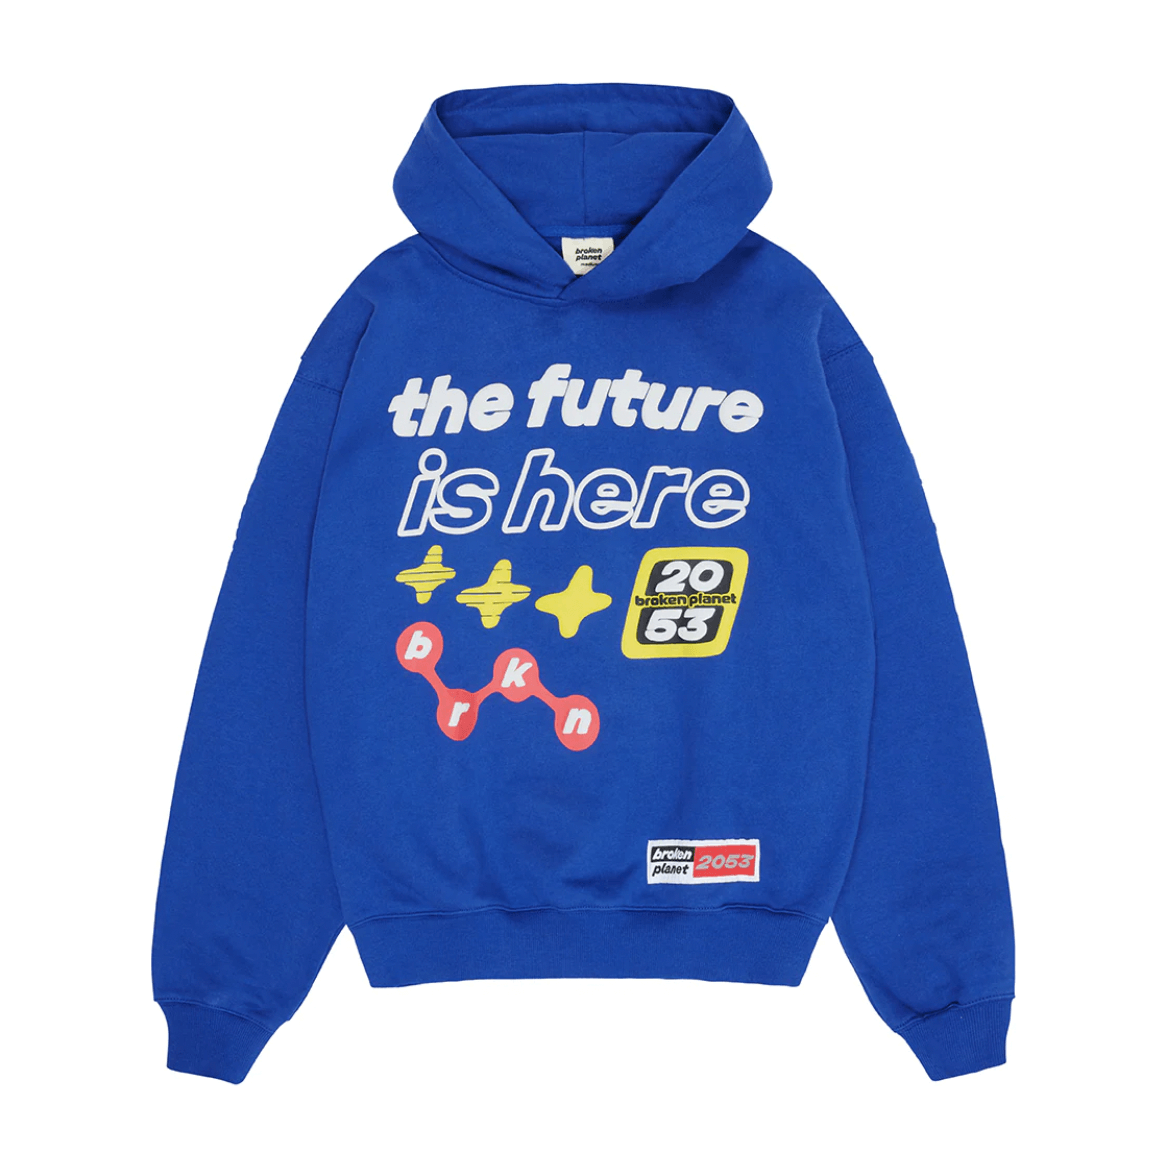 Broken Planet The Future Is Here Hoodie Blue by Broken Planet Market from £176.00